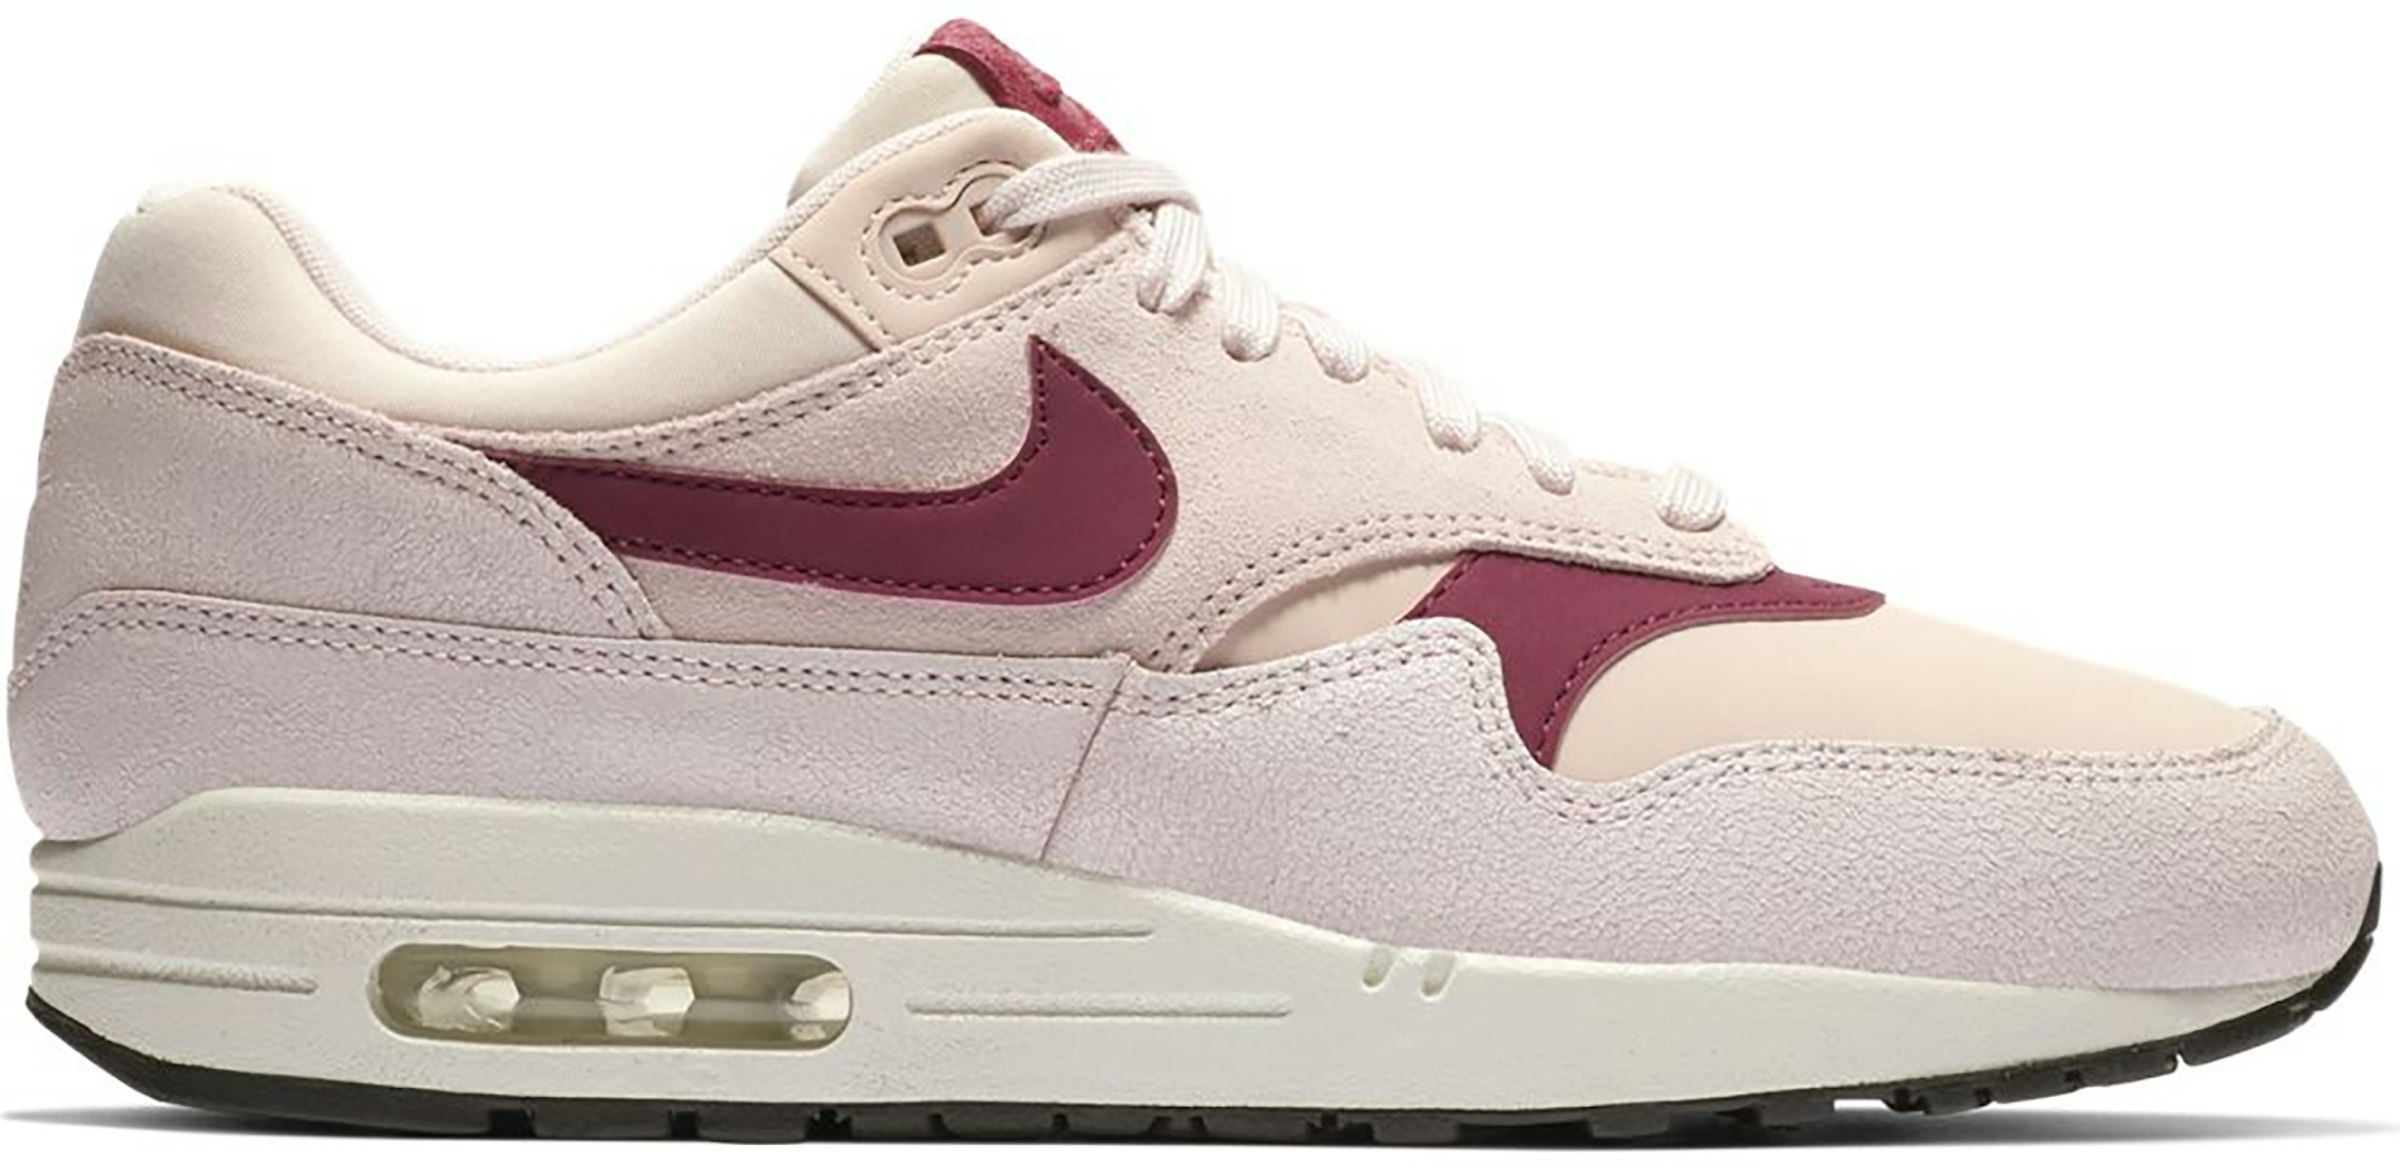 browser Bad Cadeau Nike Air Max 1 Barely Rose True Berry (Women's) - 454746-604 - US